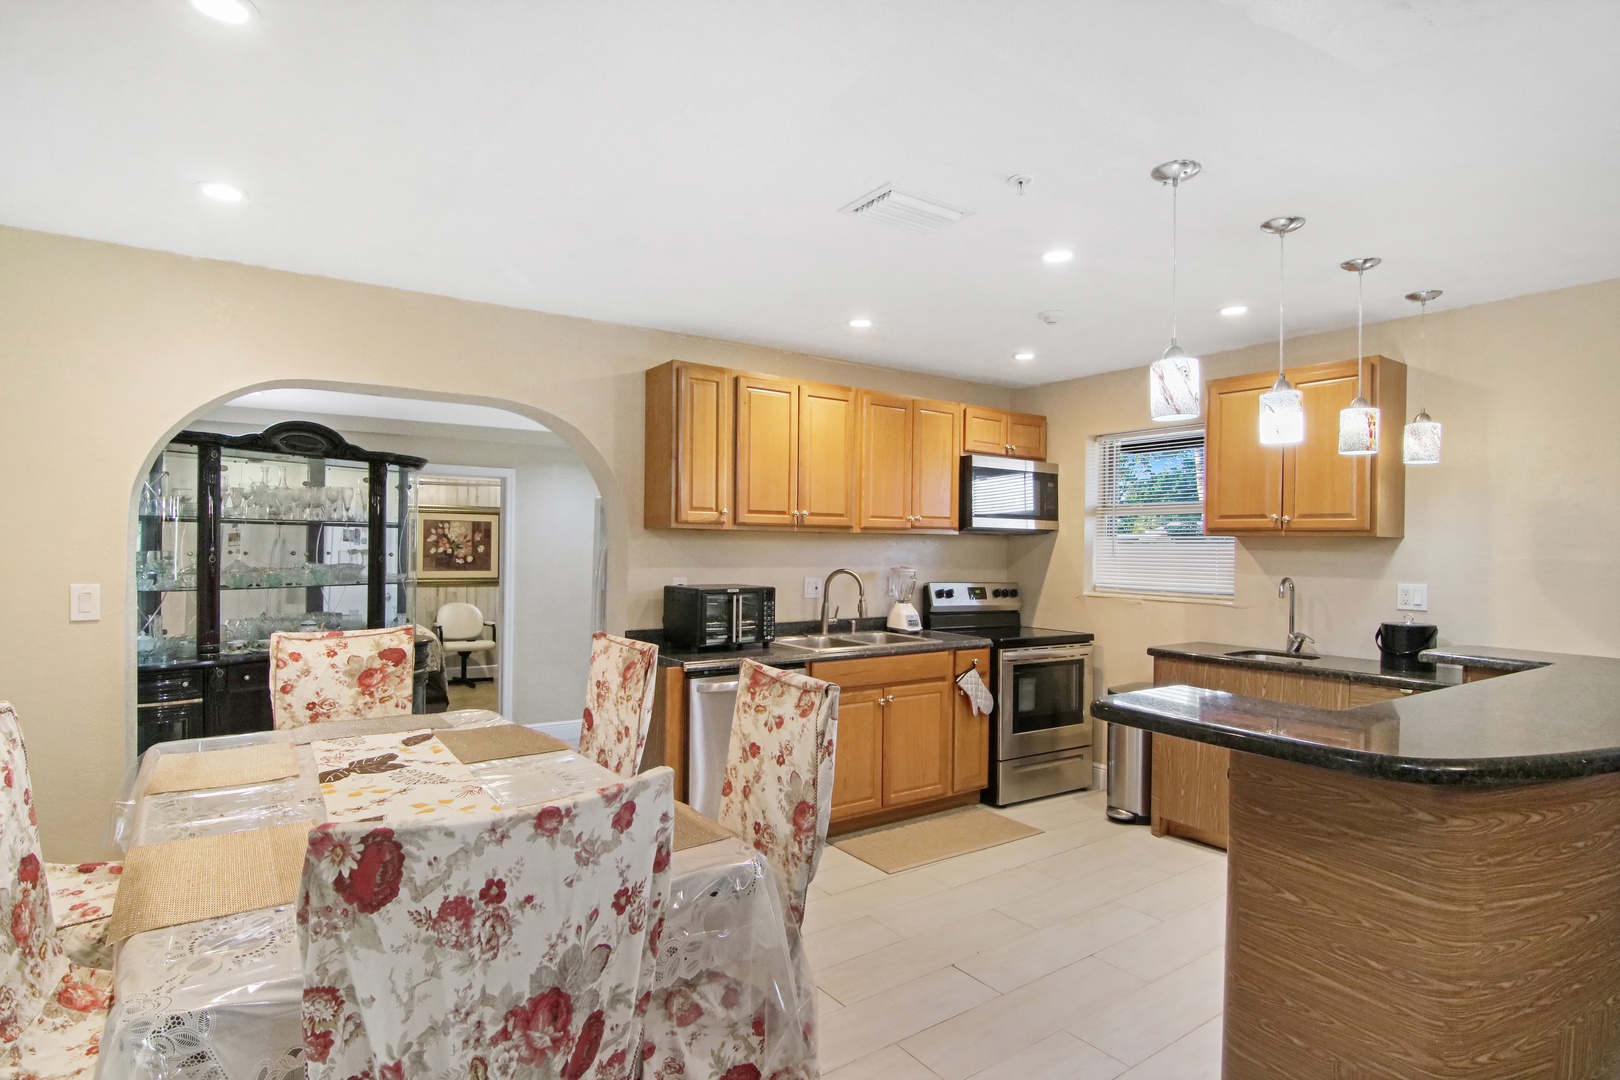 Dining and fully equipped kitchen